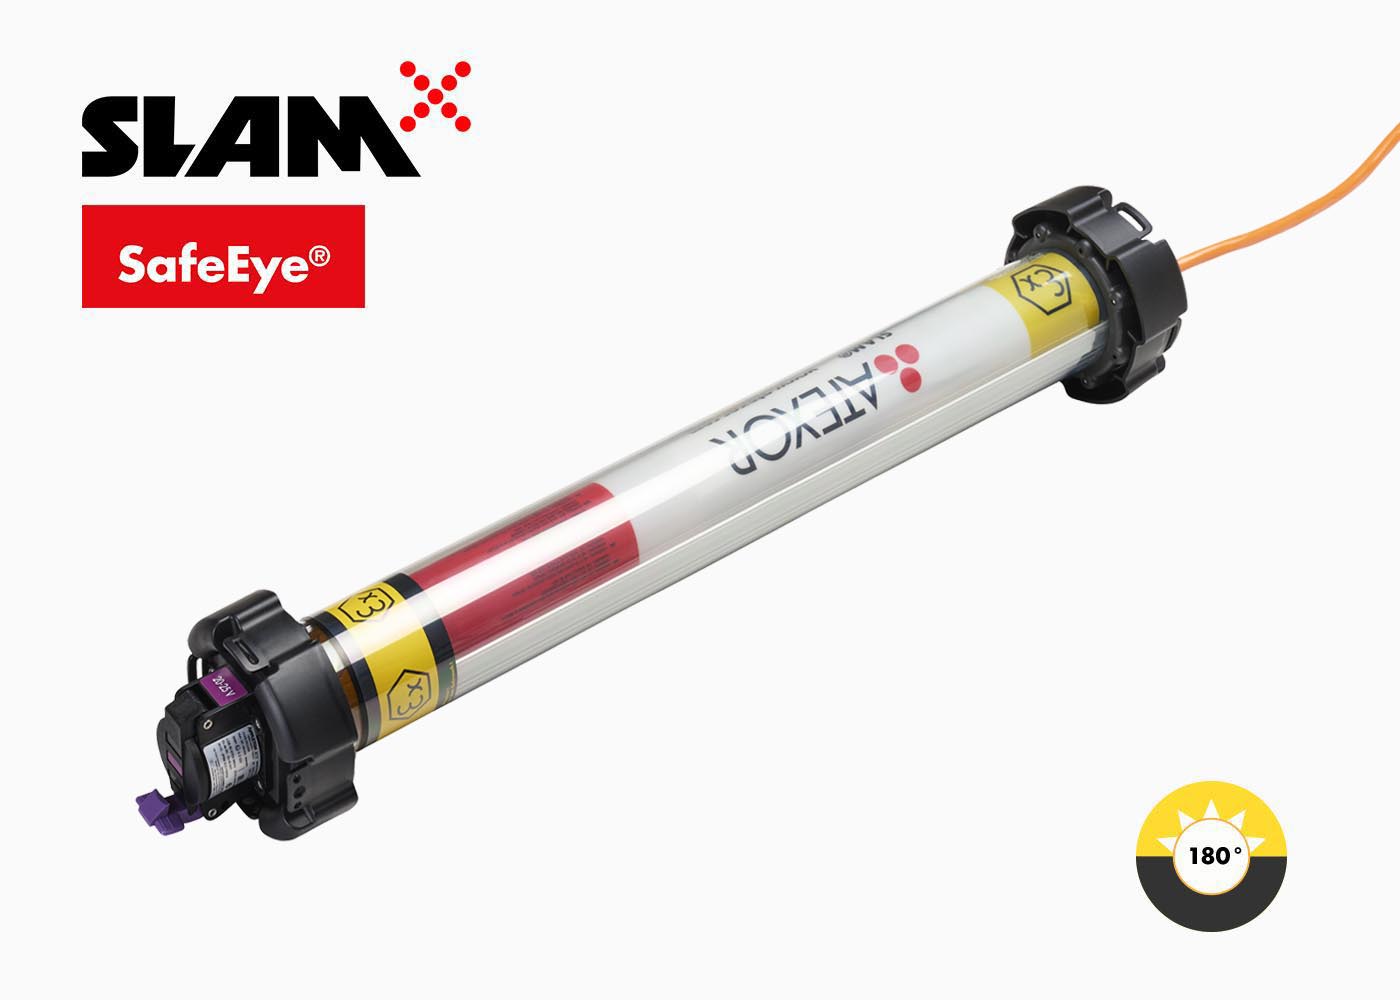 SLAM NEOS 1LED with ATEX and IECEx certification for temporary hazardous area lighting